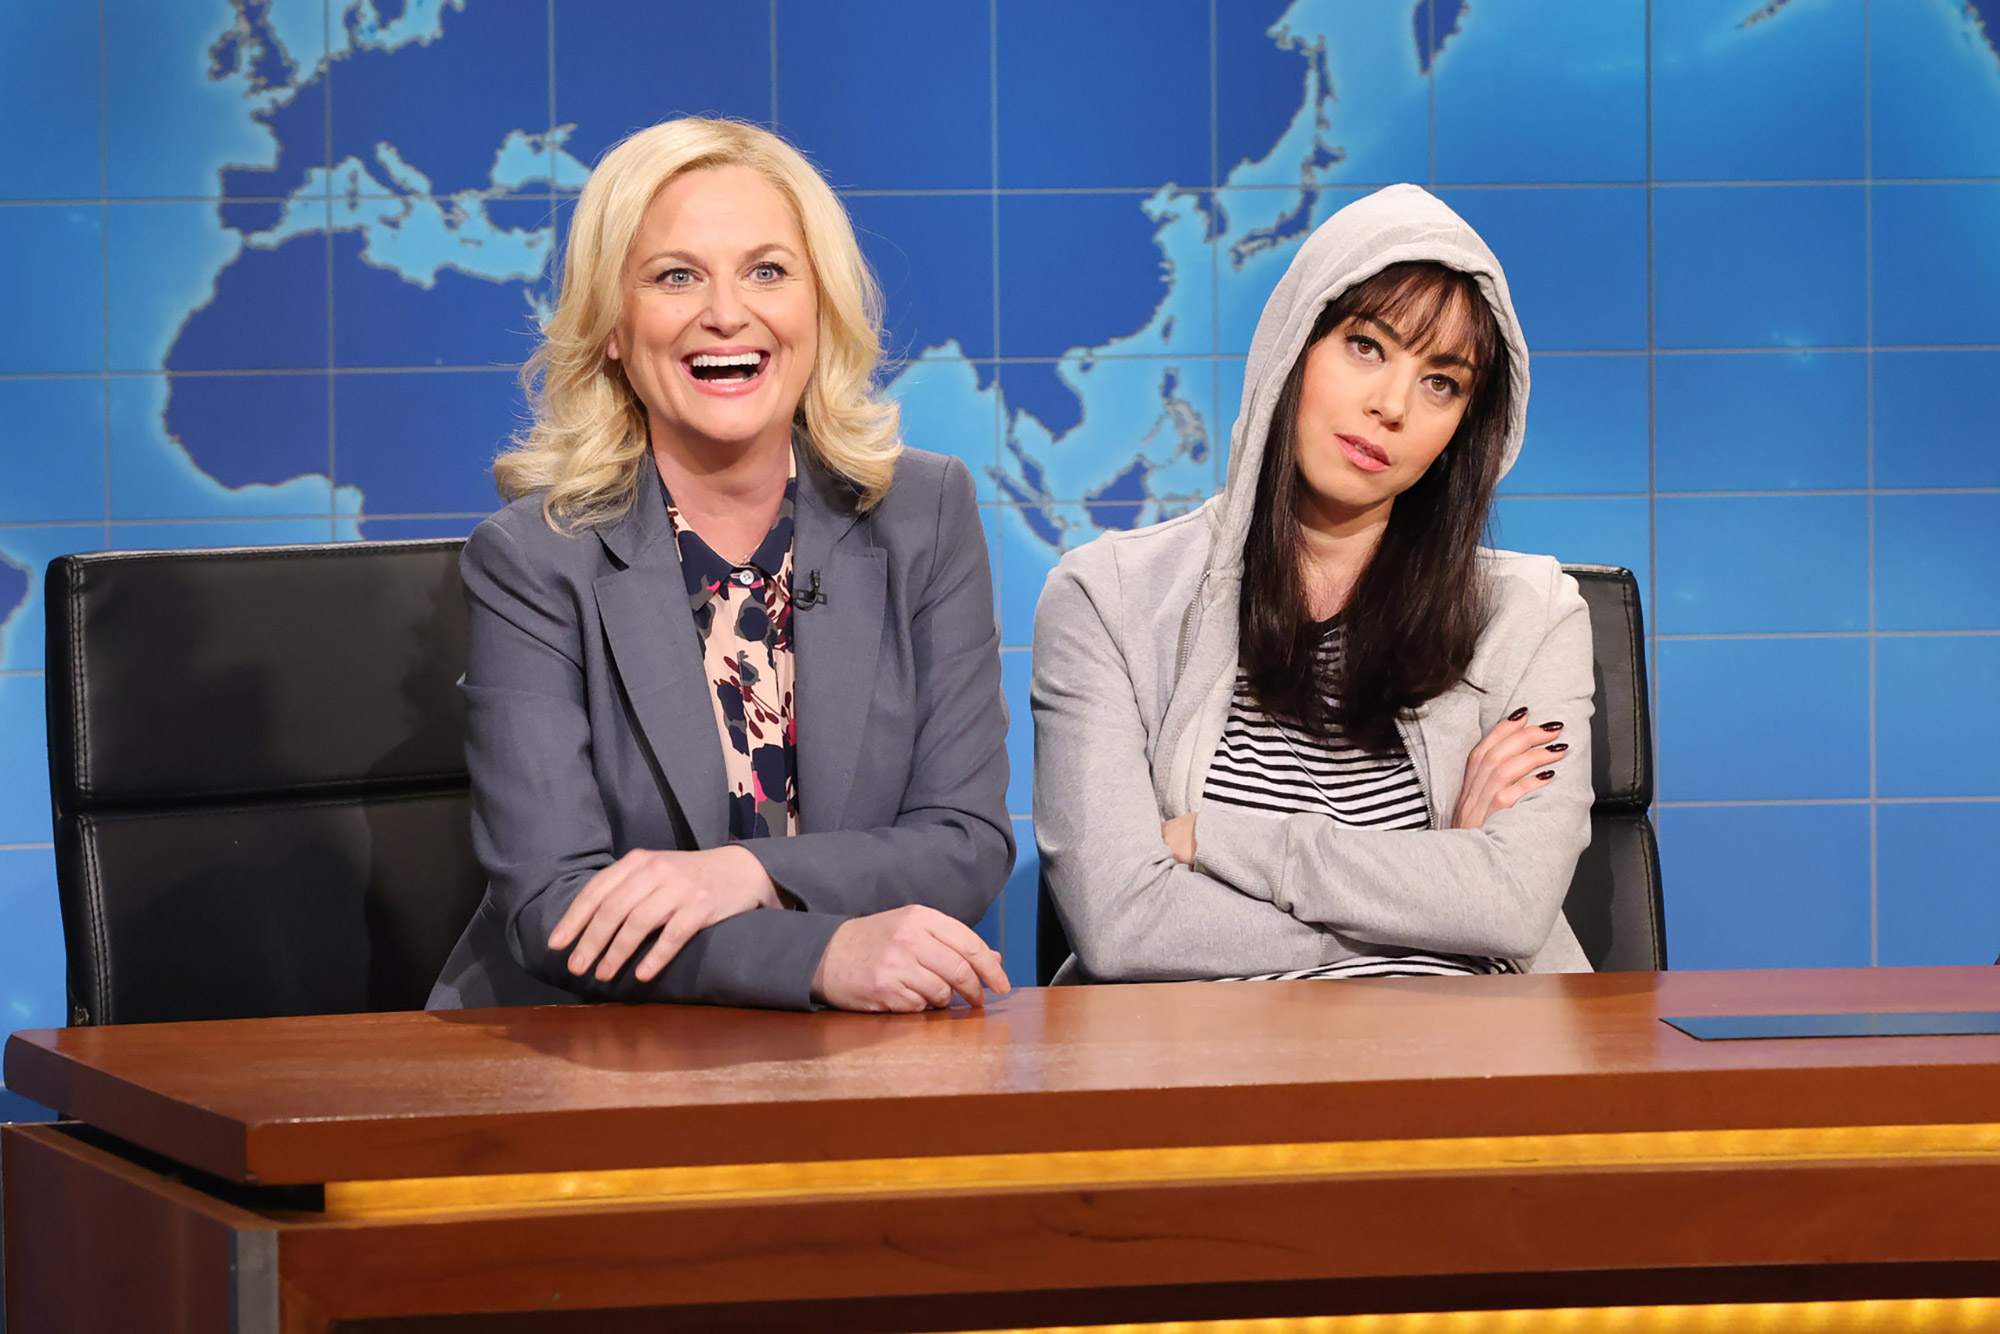 SATURDAY NIGHT LIVE -- Aubrey Plaza, Sam Smith Episode 1836 -- Pictured: (l-r) Amy Poehler as Leslie Knope, Host Aubrey Plaza as April Ludgate, and anchor Colin Jost during Weekend Update on Saturday, January 21, 2023 -- (Photo by: Will Heath/NBC via Getty Images)